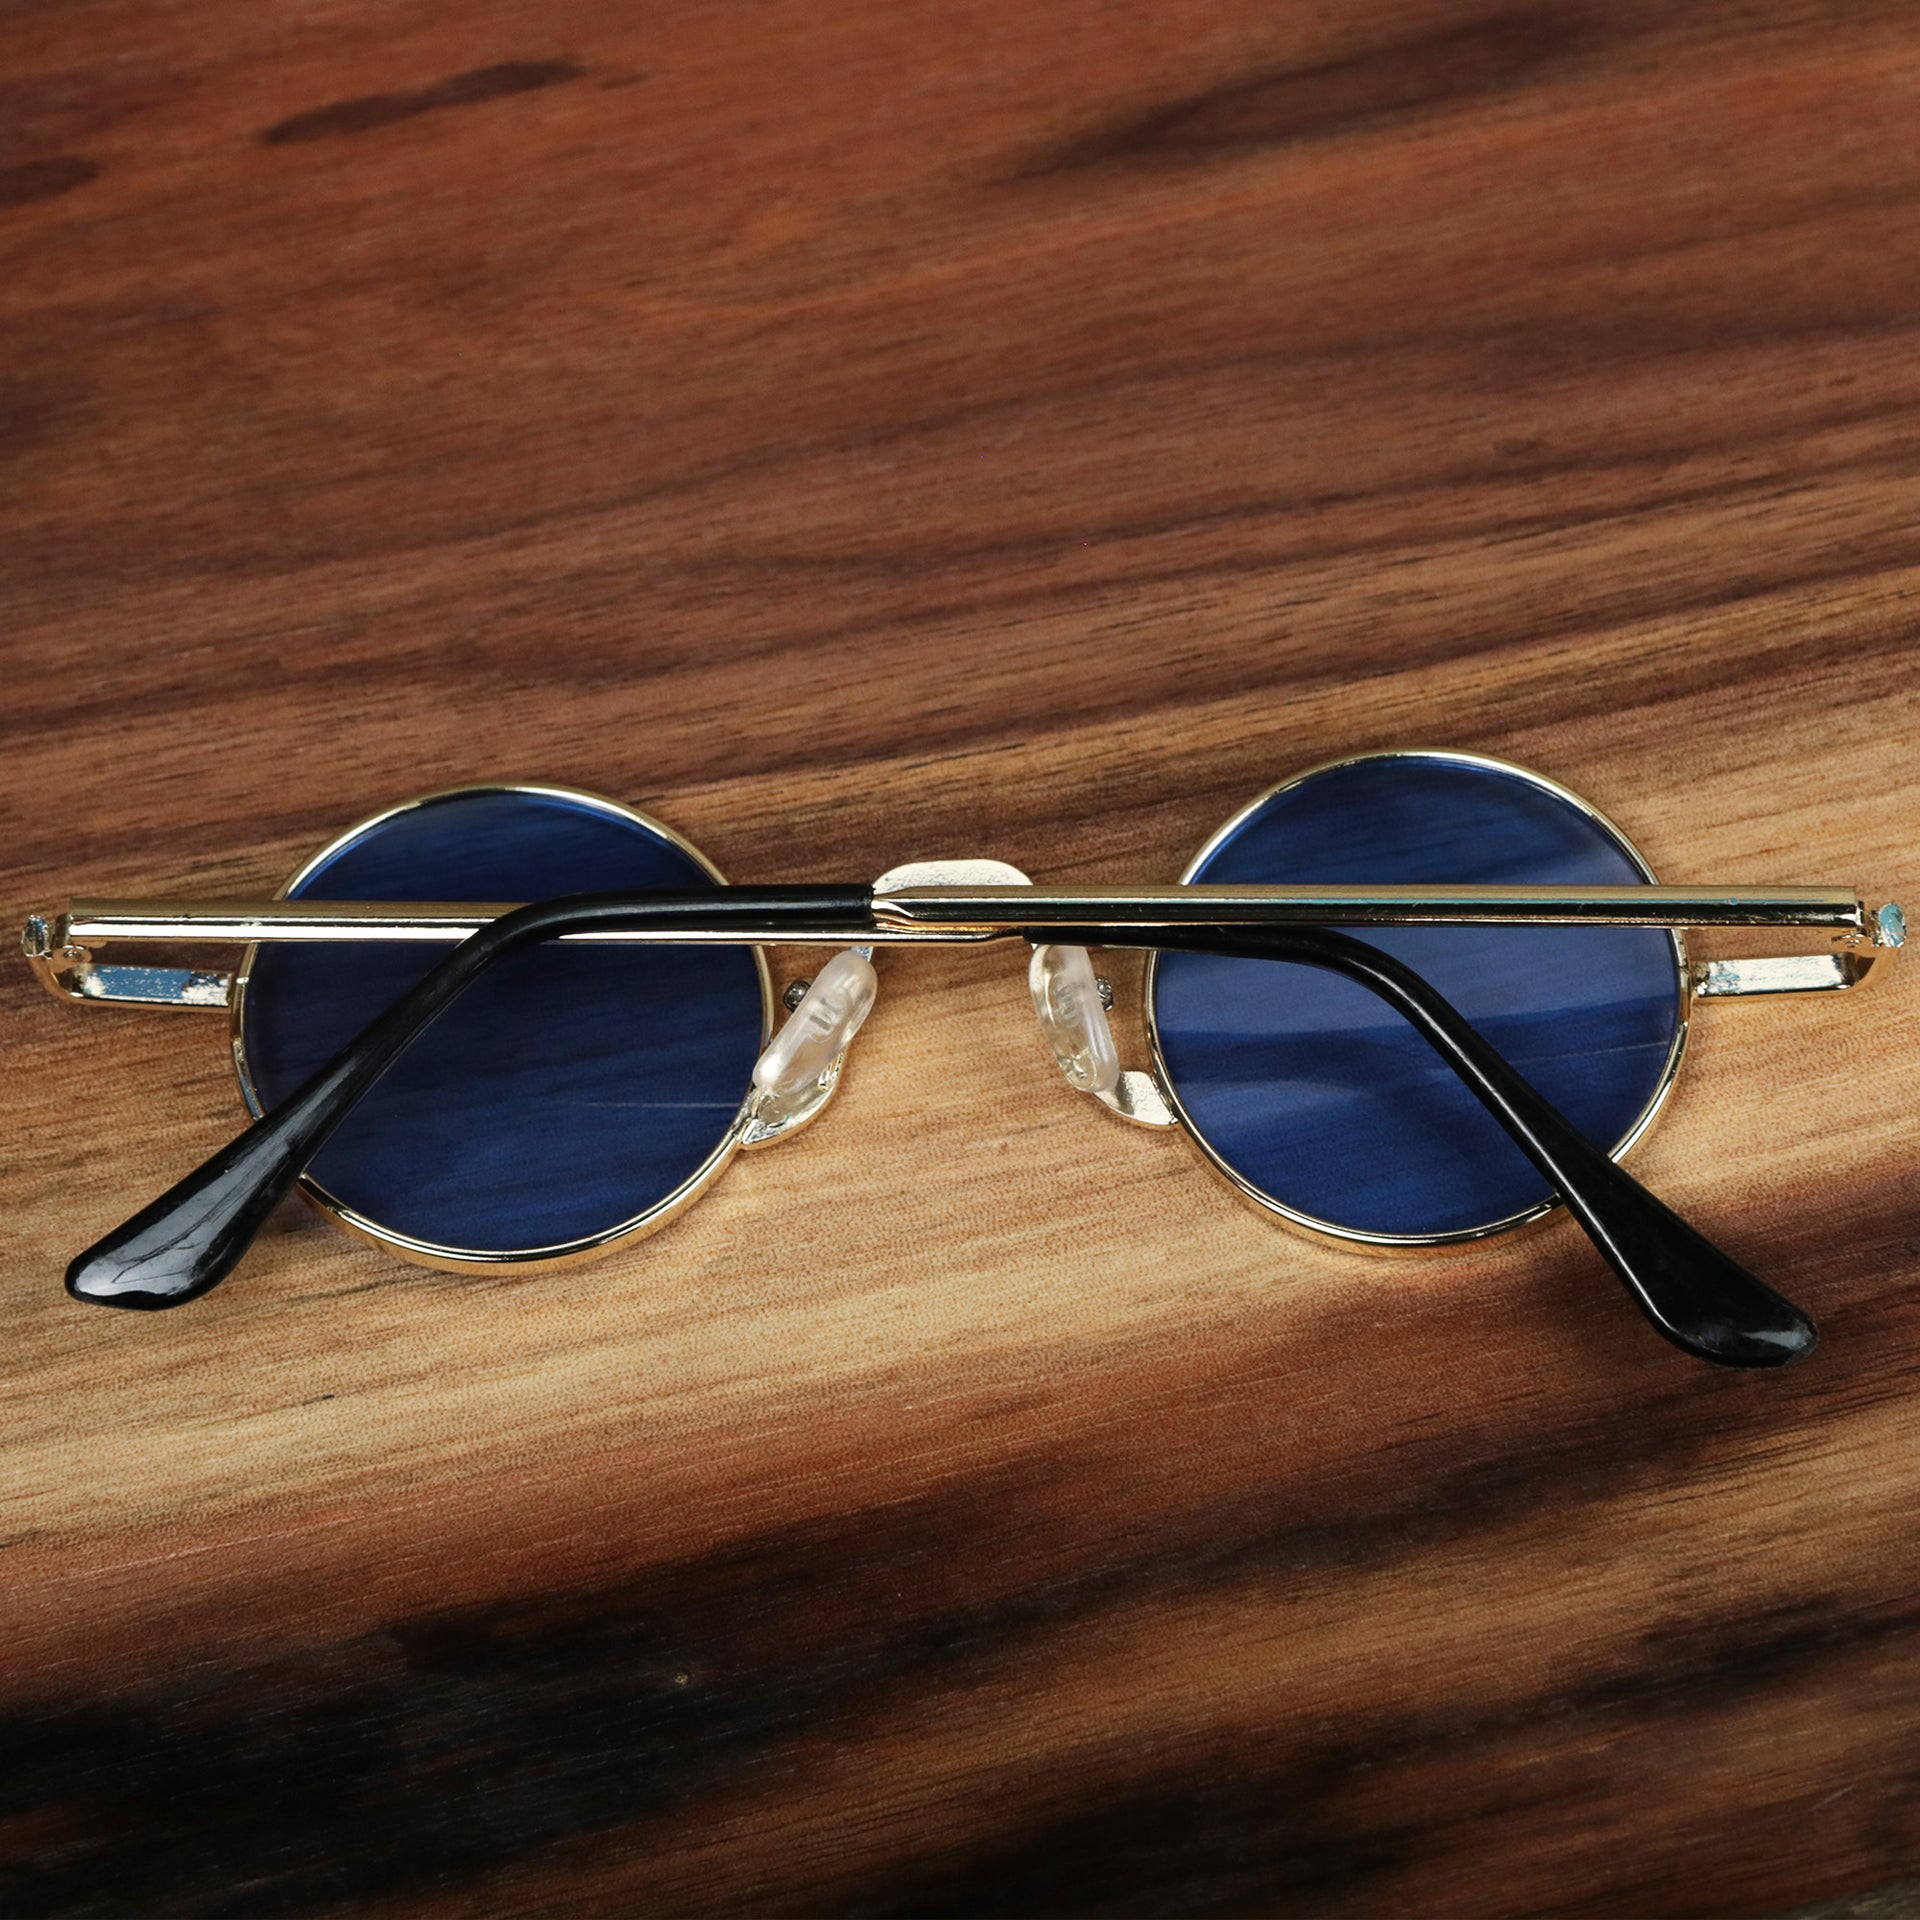 The Round Frames Blue Lens Sunglasses with Gold Frame folded up